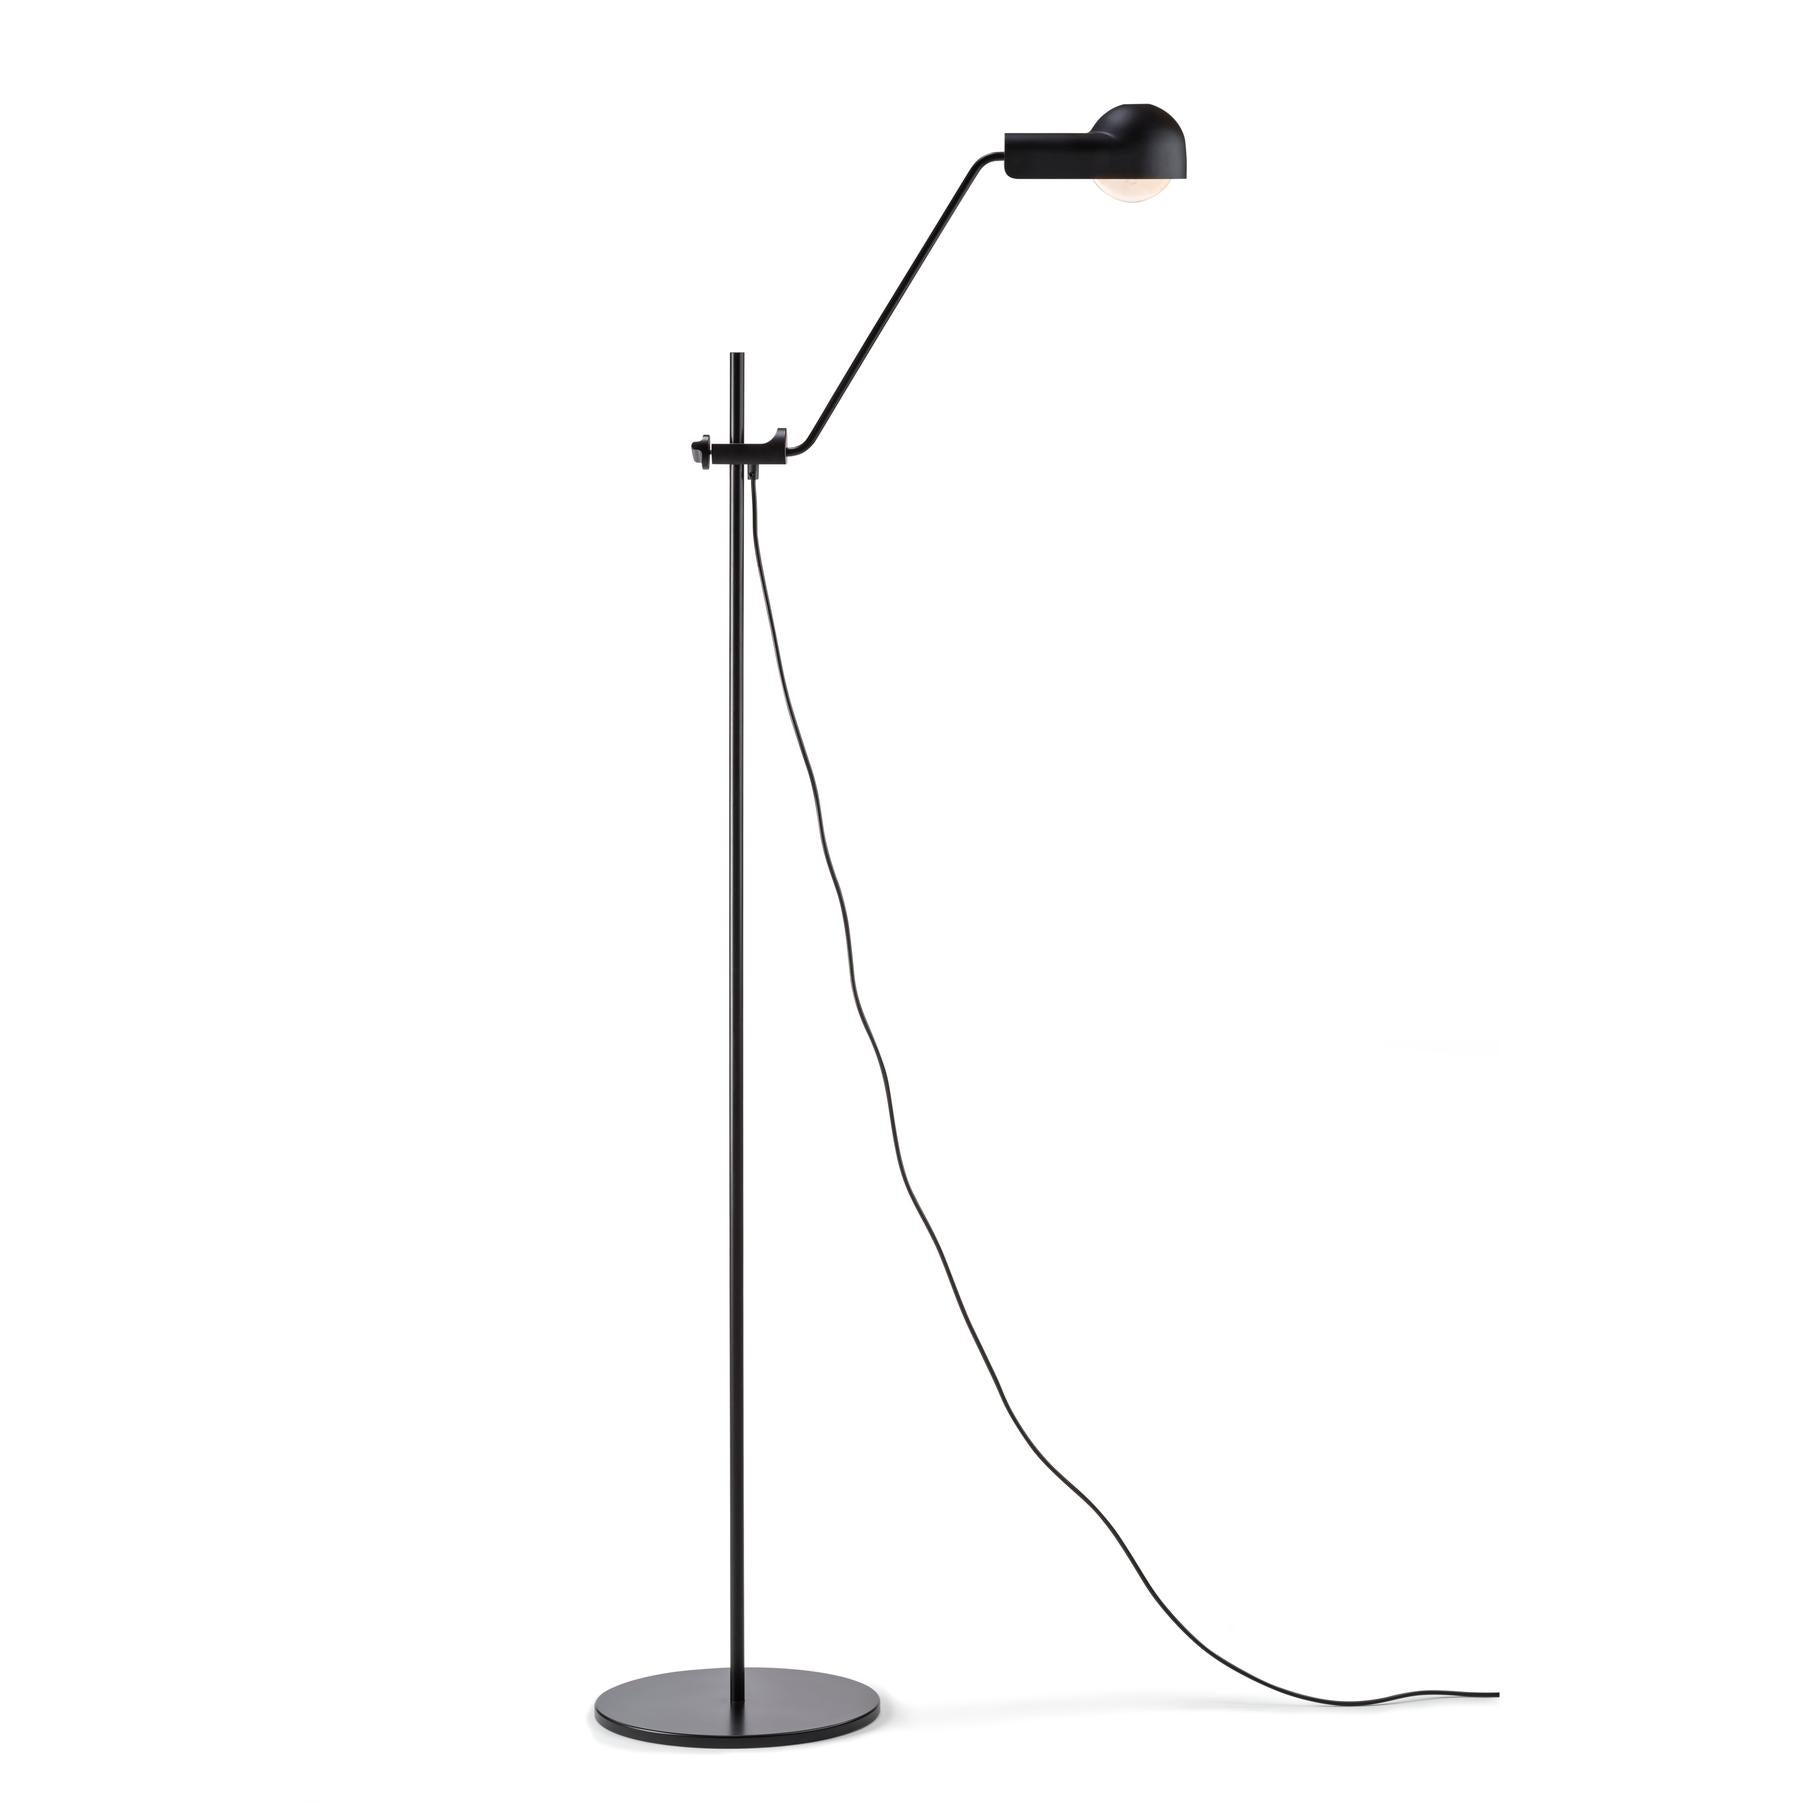 Floor lamp designed by Joe Colombo in 1965. 

The Domo lamp was originally designed by Italian designer Joe Colombo in 1965. Back then he designed three lamps based on the same core shape. Known for his democratic and functional design, his